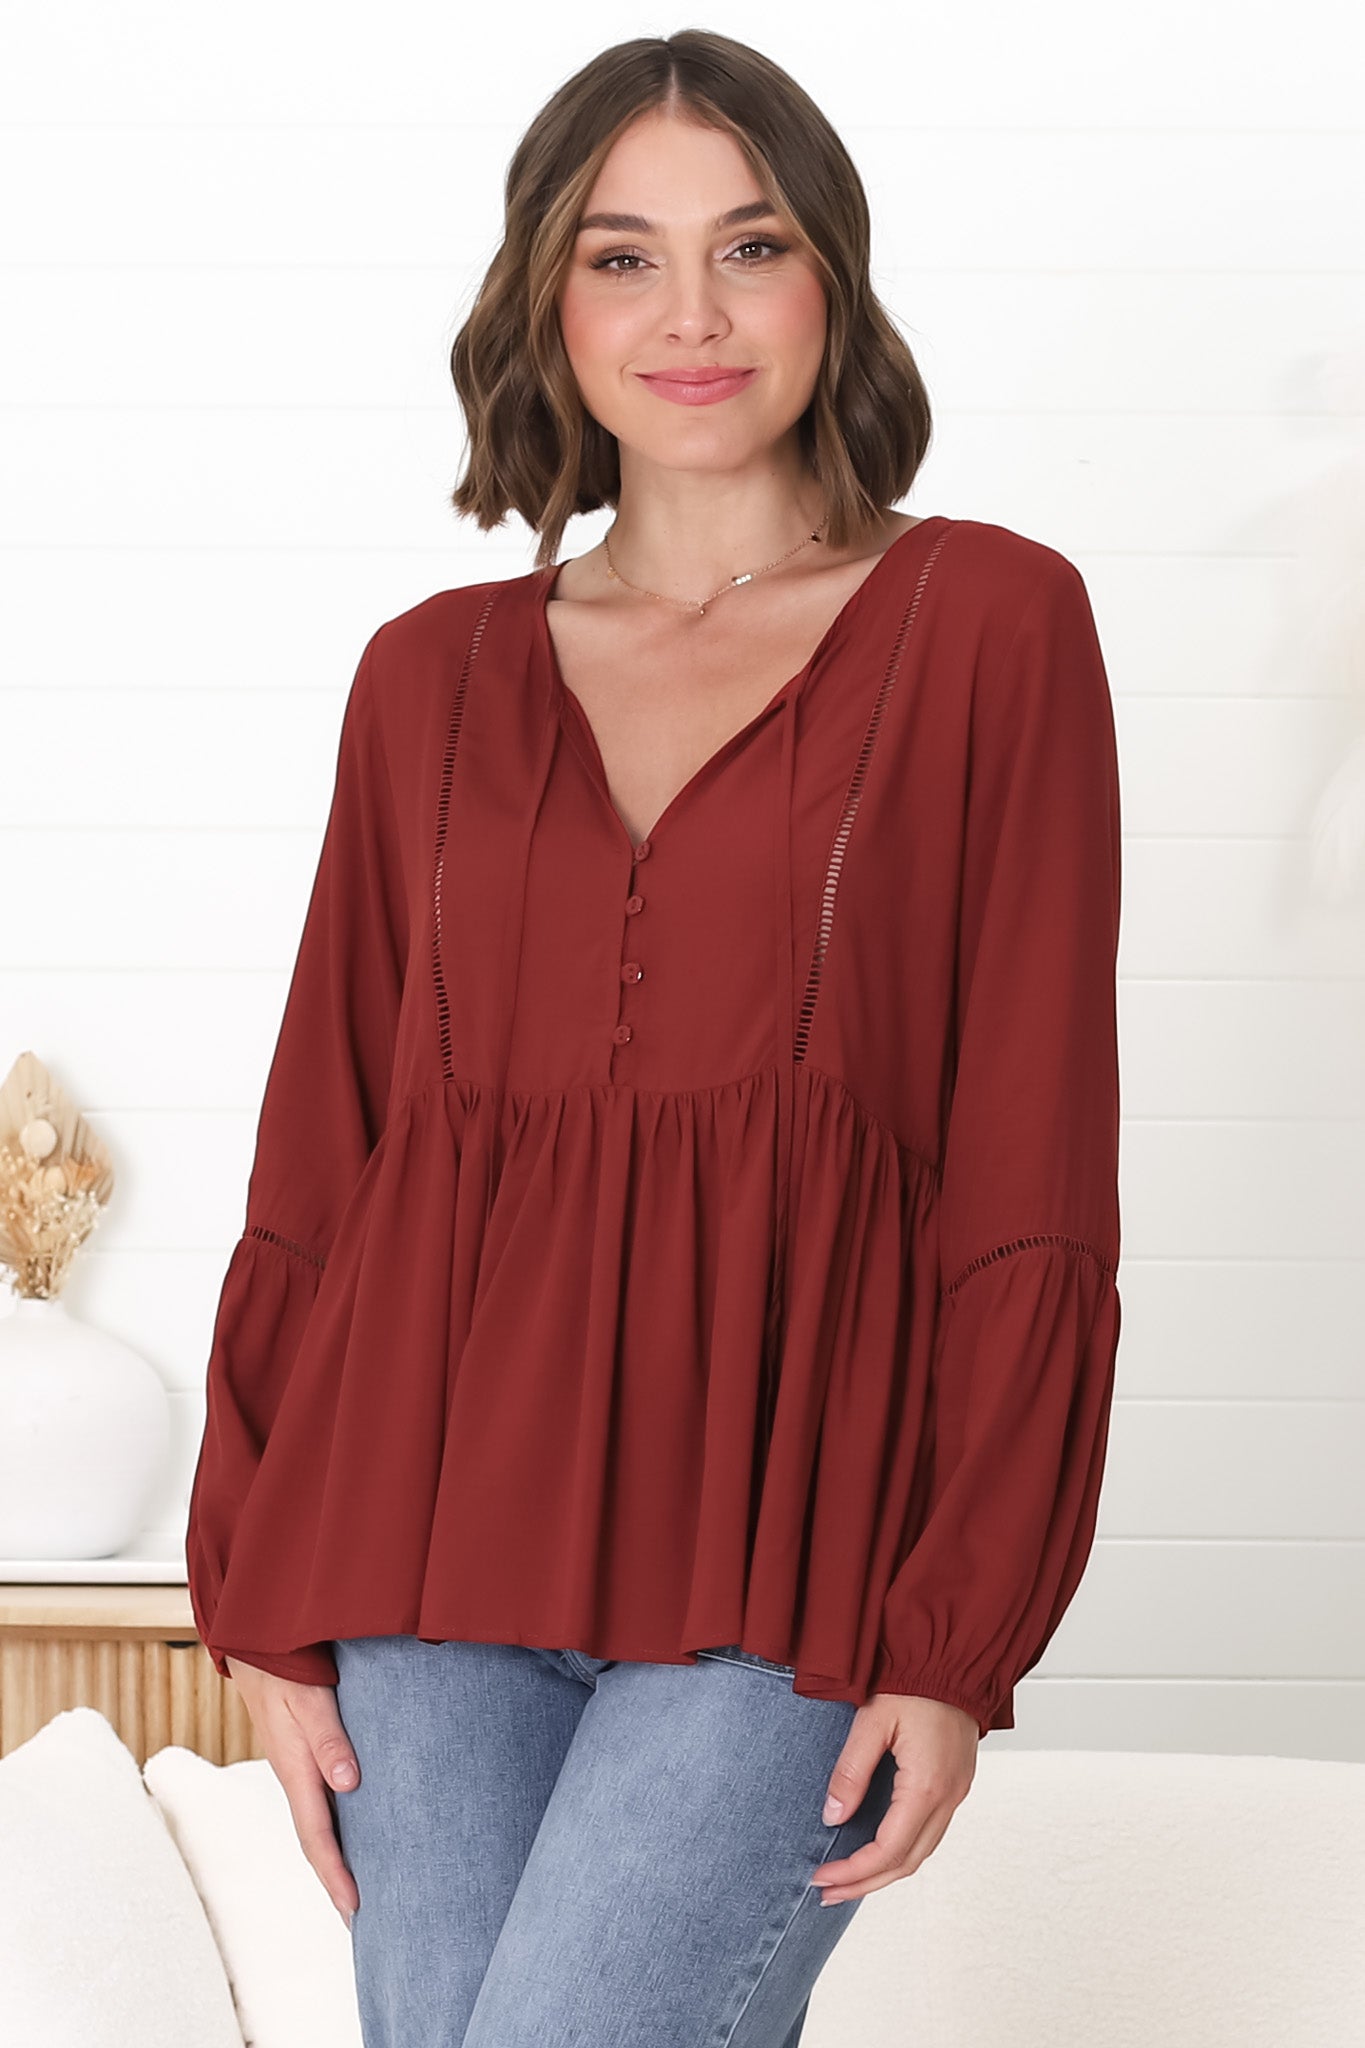 Alexia Top -  V Neck Smock Top with Crochet Insert Details in Rust